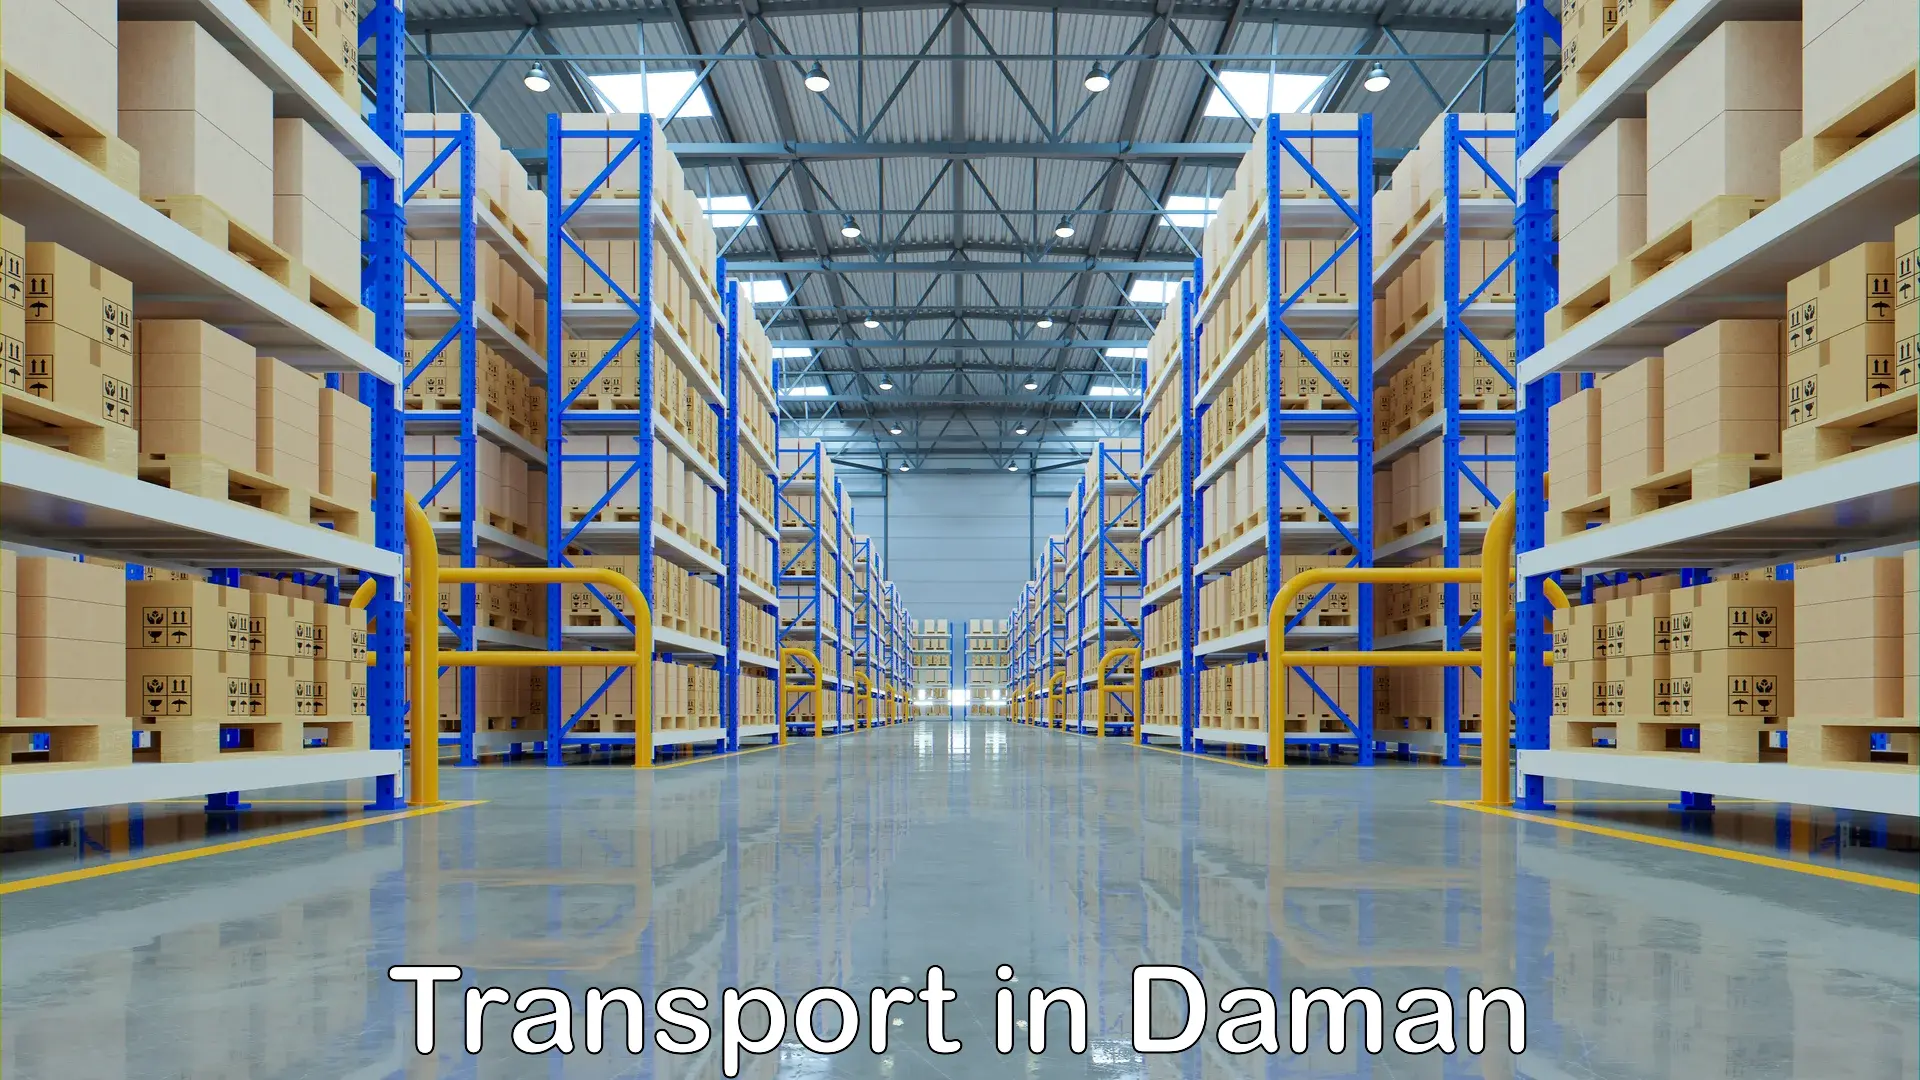 Daily transport service in Daman